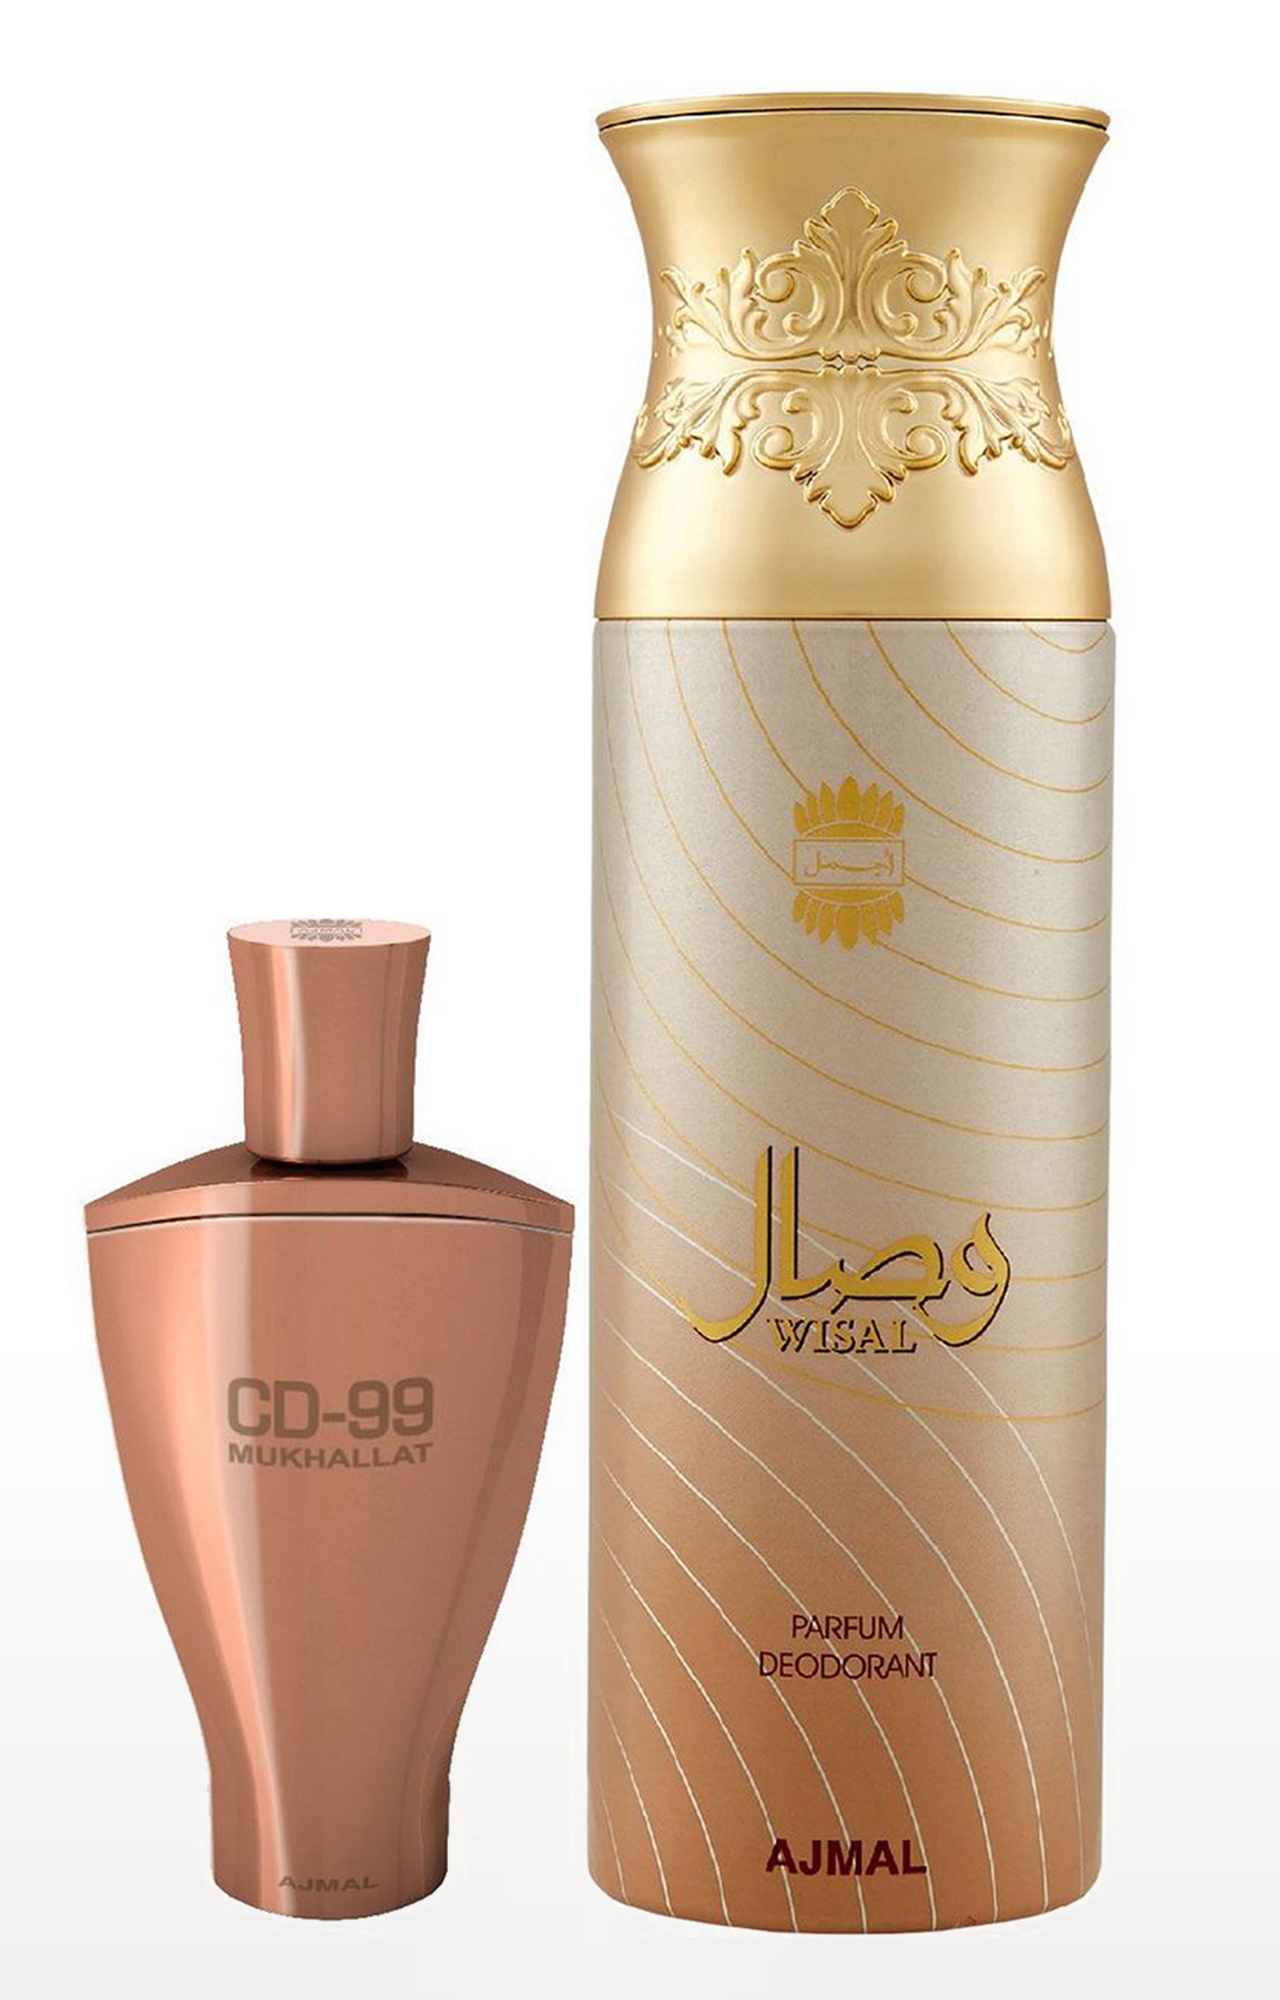 Ajmal | Ajmal CD 99 Mukhallat Concentrated Perfume Oil Oriental Alcohol-free Attar 14ml for Unisex and Wisal Deodorant Musky Fragrance 200ml for Women 0